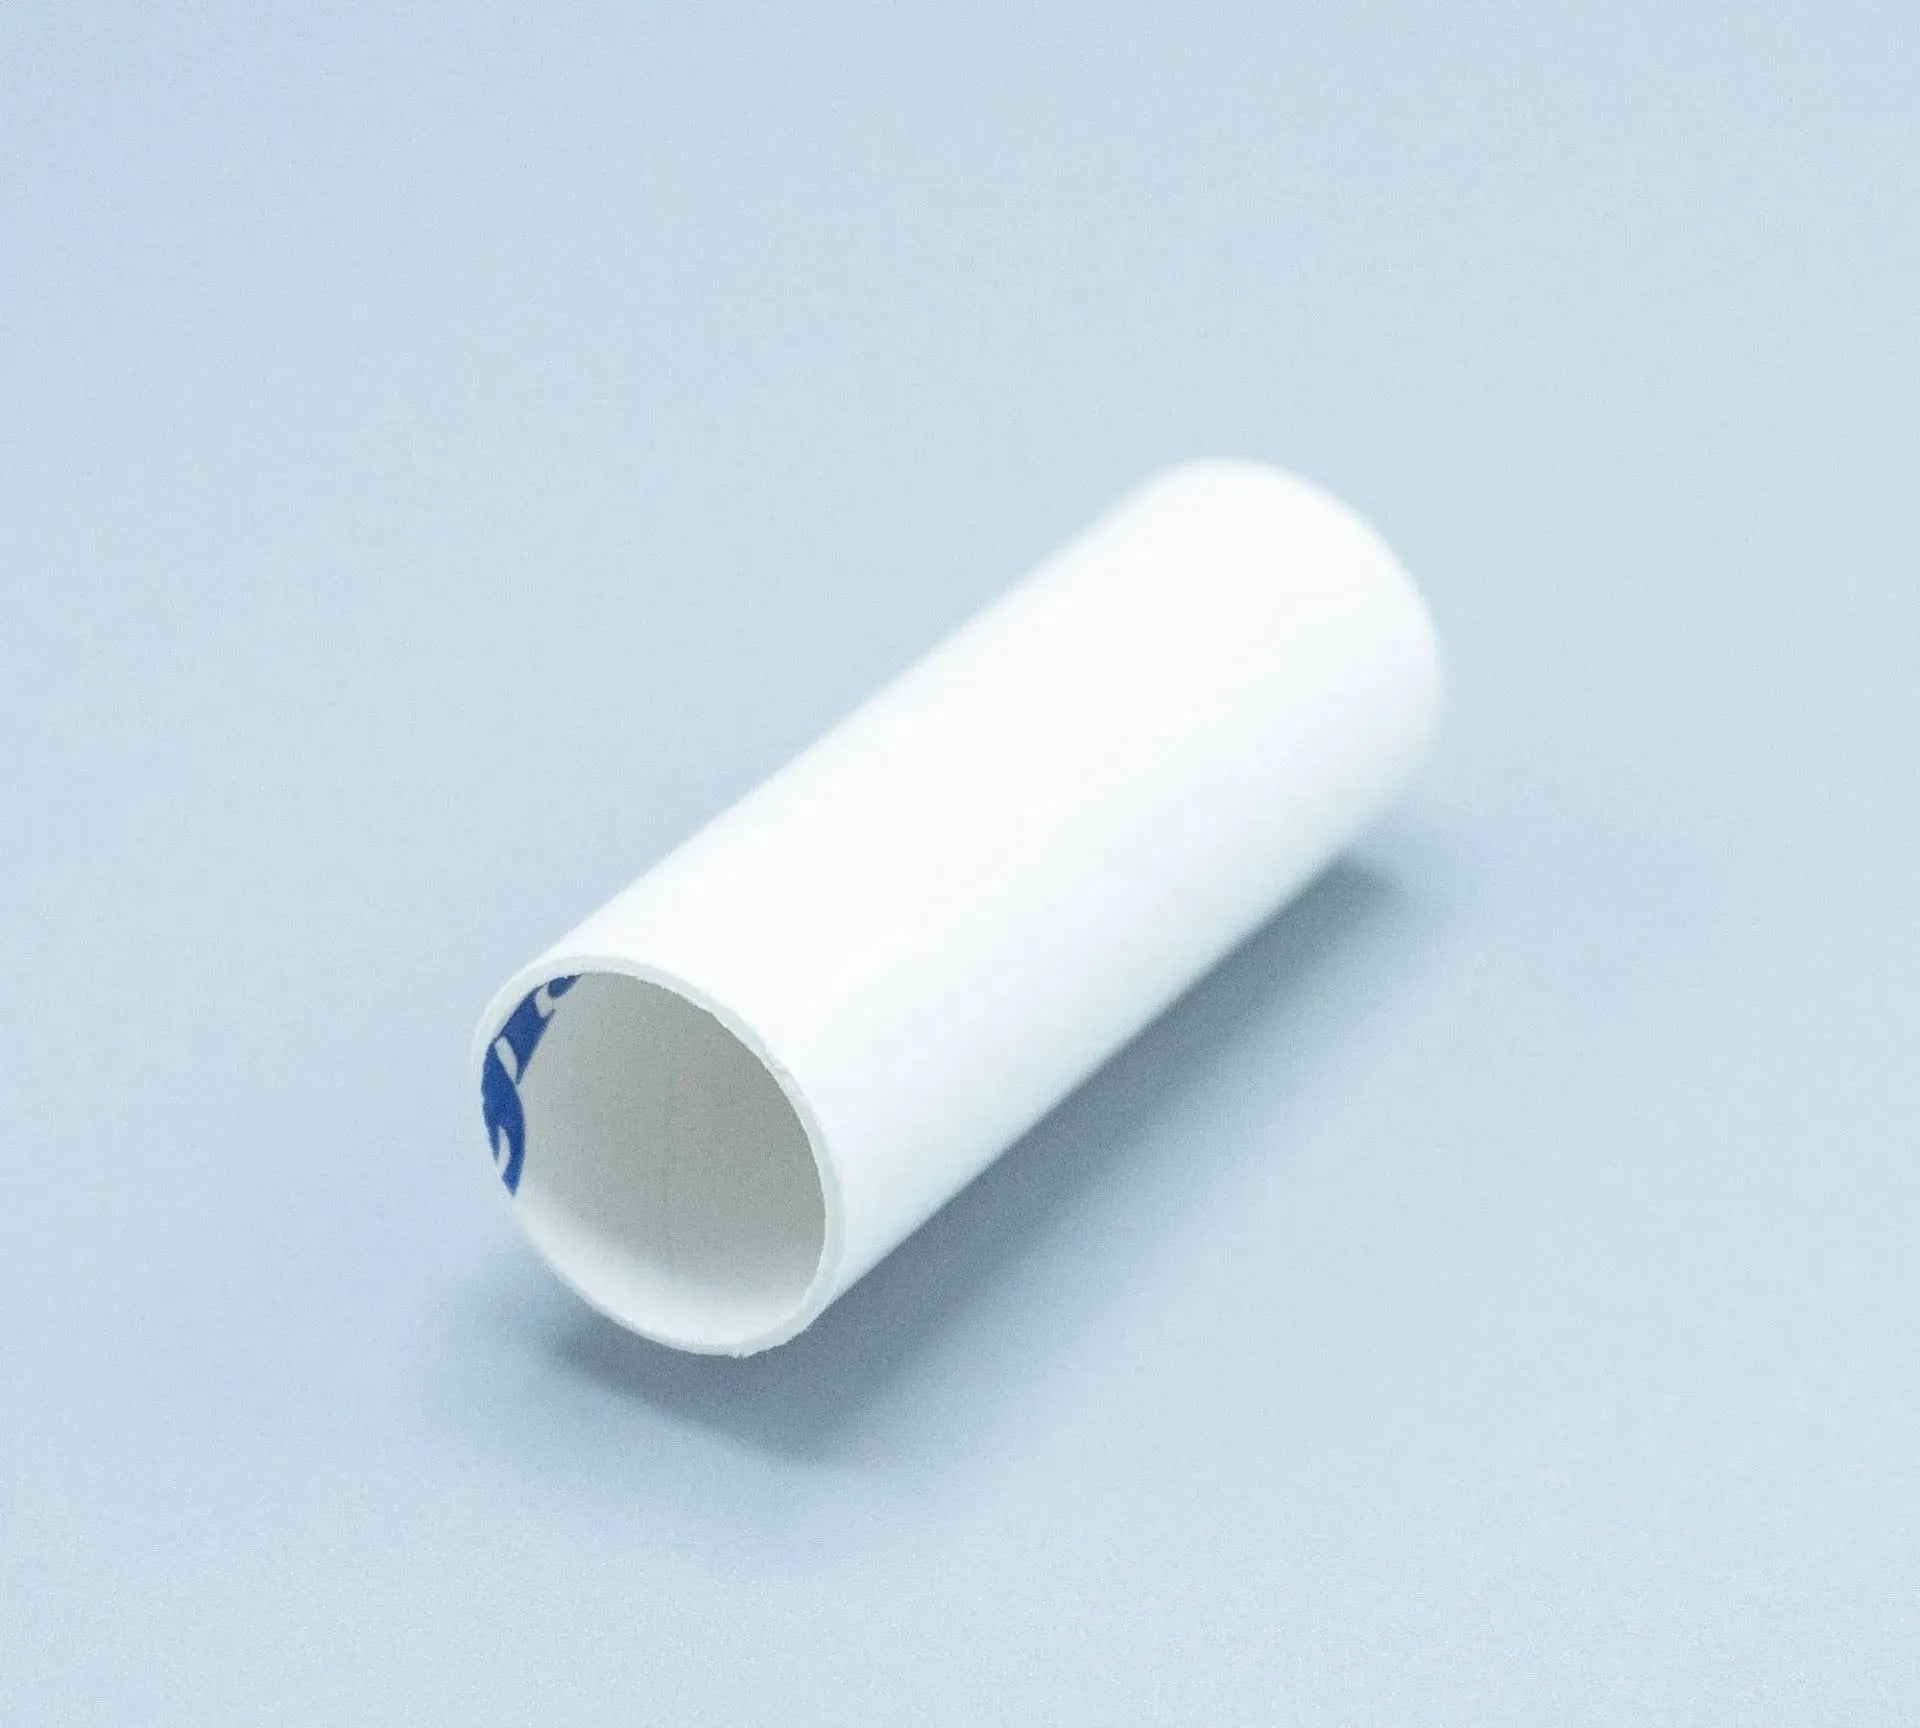 Mini mouthpieces for a carbon monoxide monitor.  The mouthpiece shown is white.